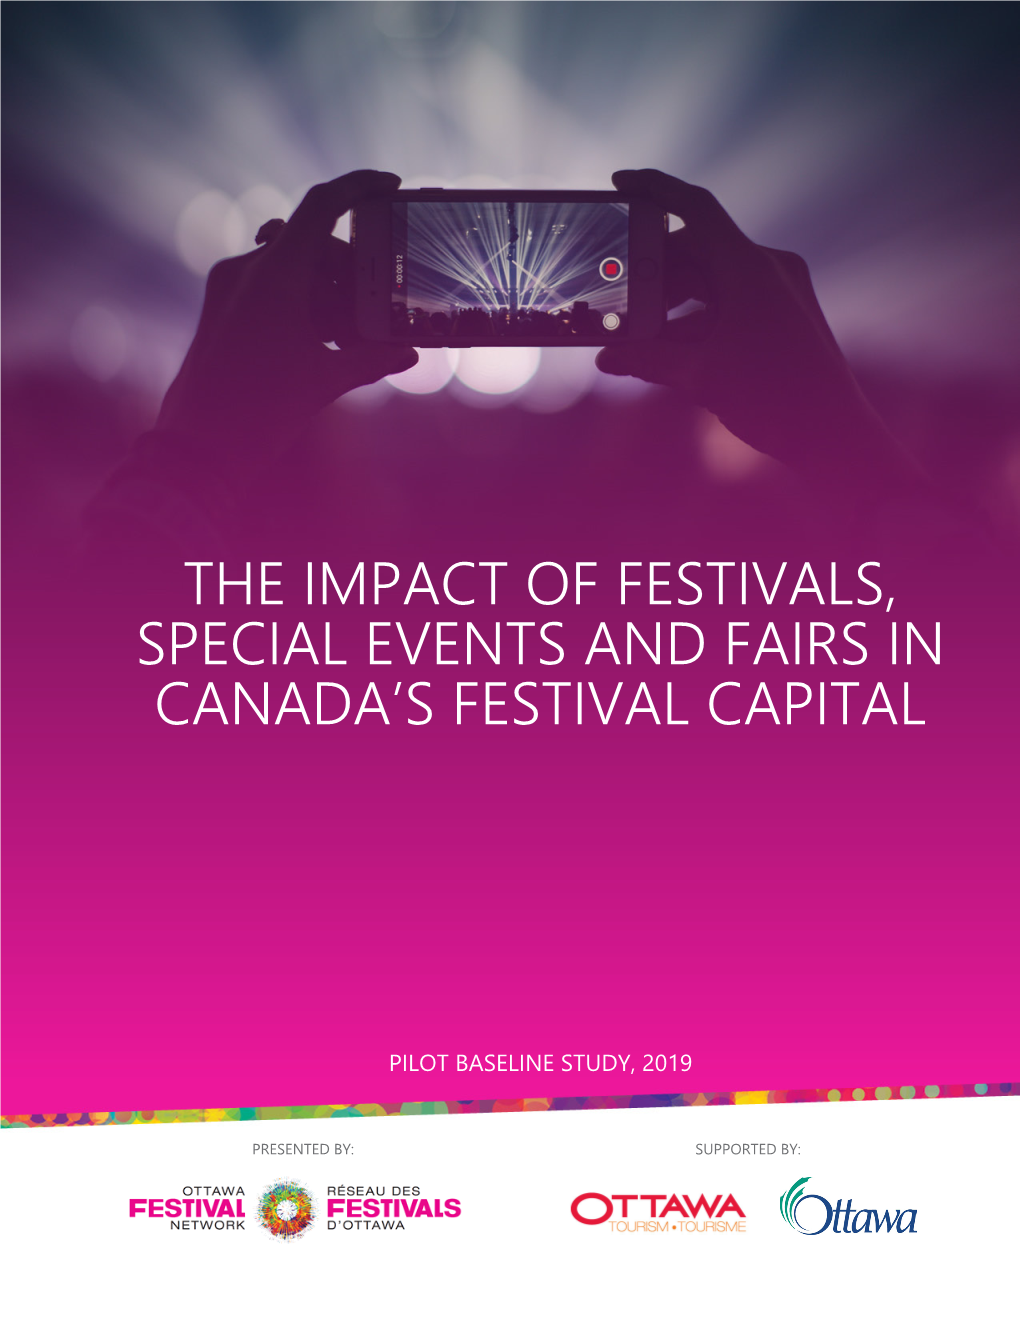 The Impact of Festivals, Special Events and Fairs in Canada’S Festival Capital